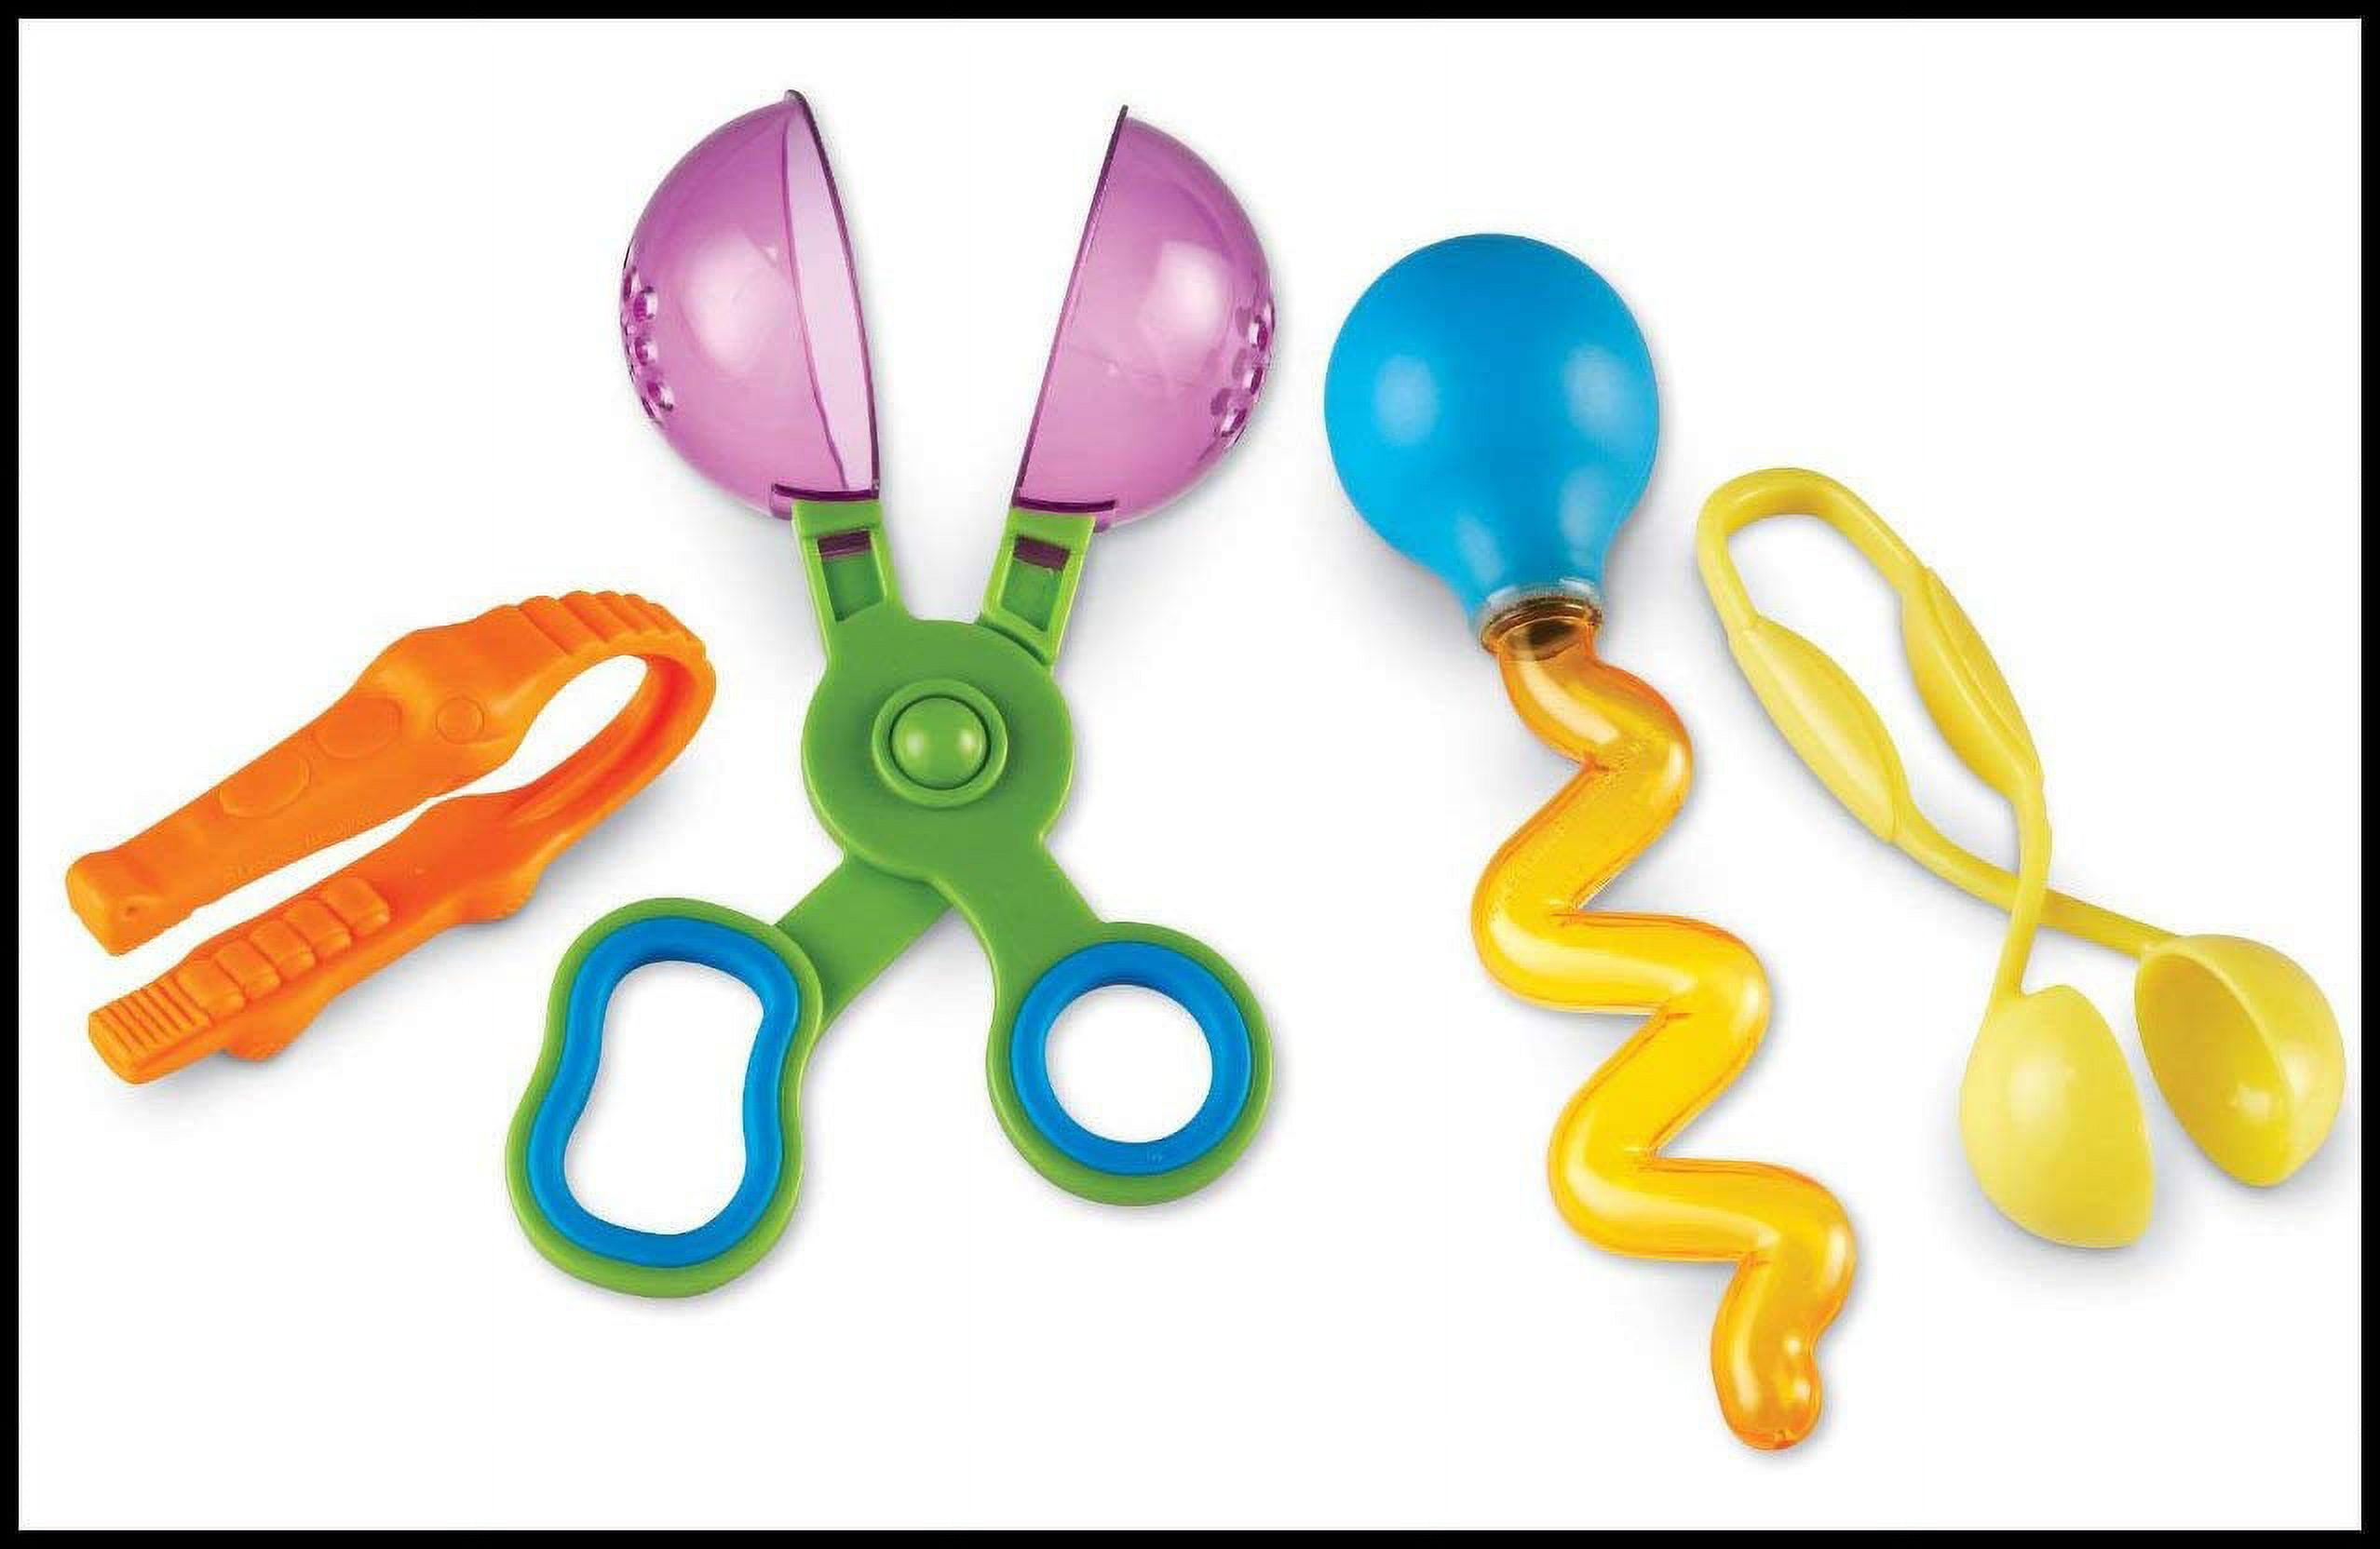 Tong and Tweezer Assortment of 3 for Children, Perfect for Fine Motor